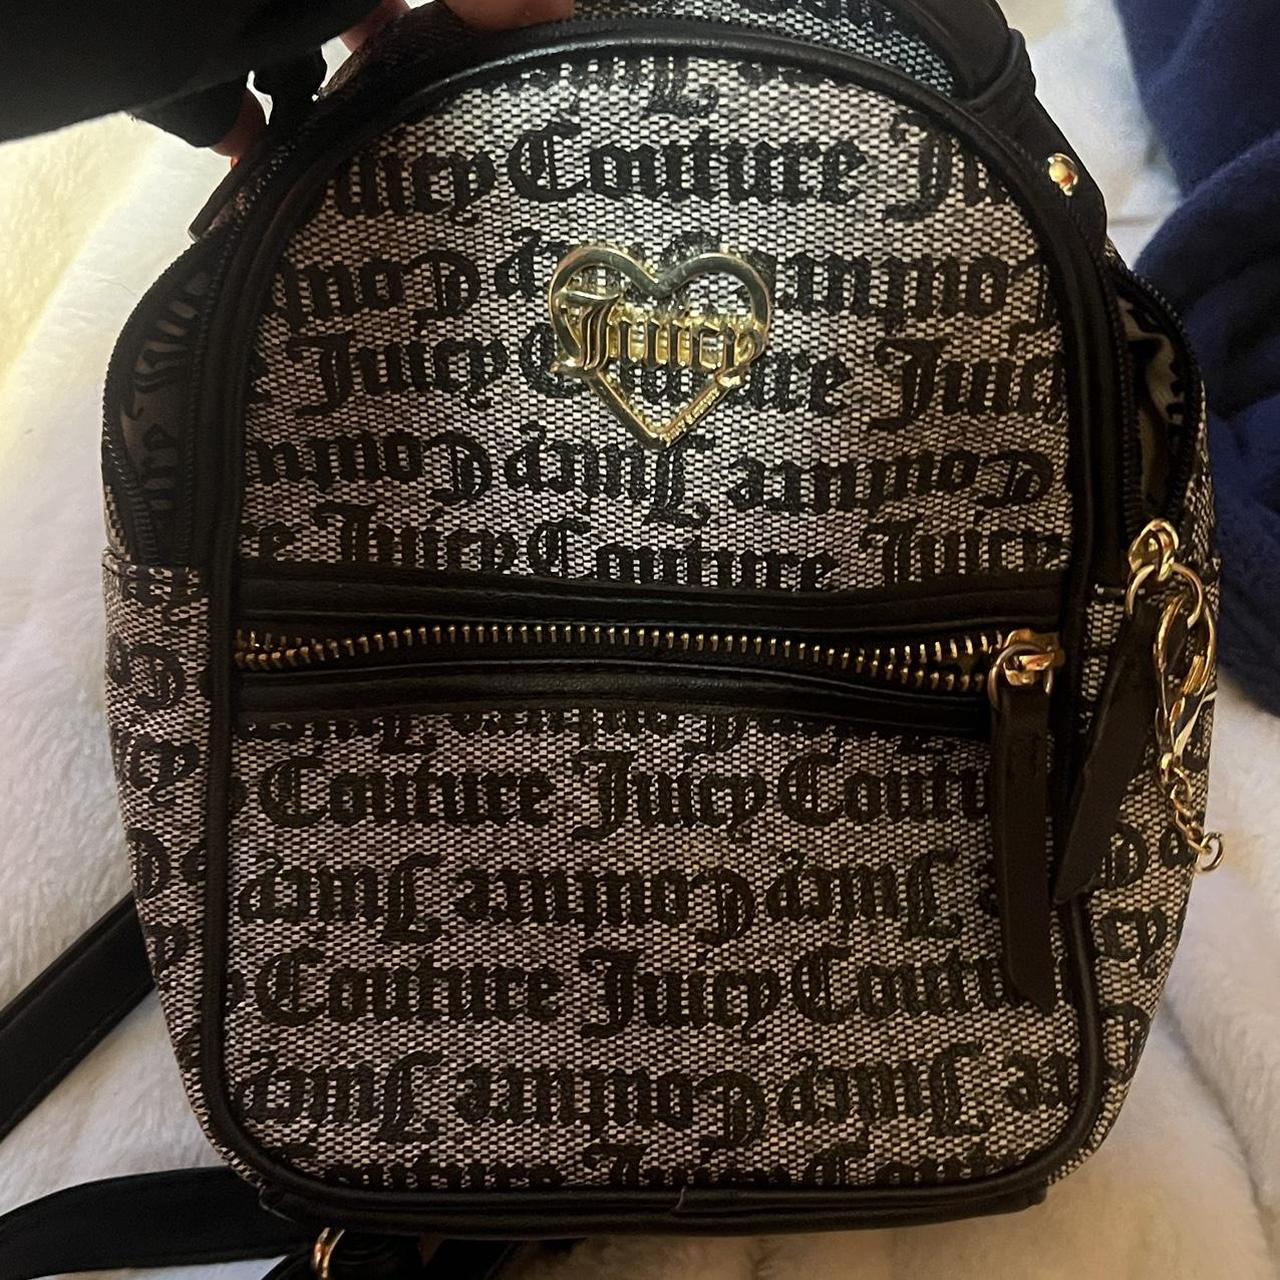 Juicy Couture Pink Velvet Backpack / Purse - Etsy